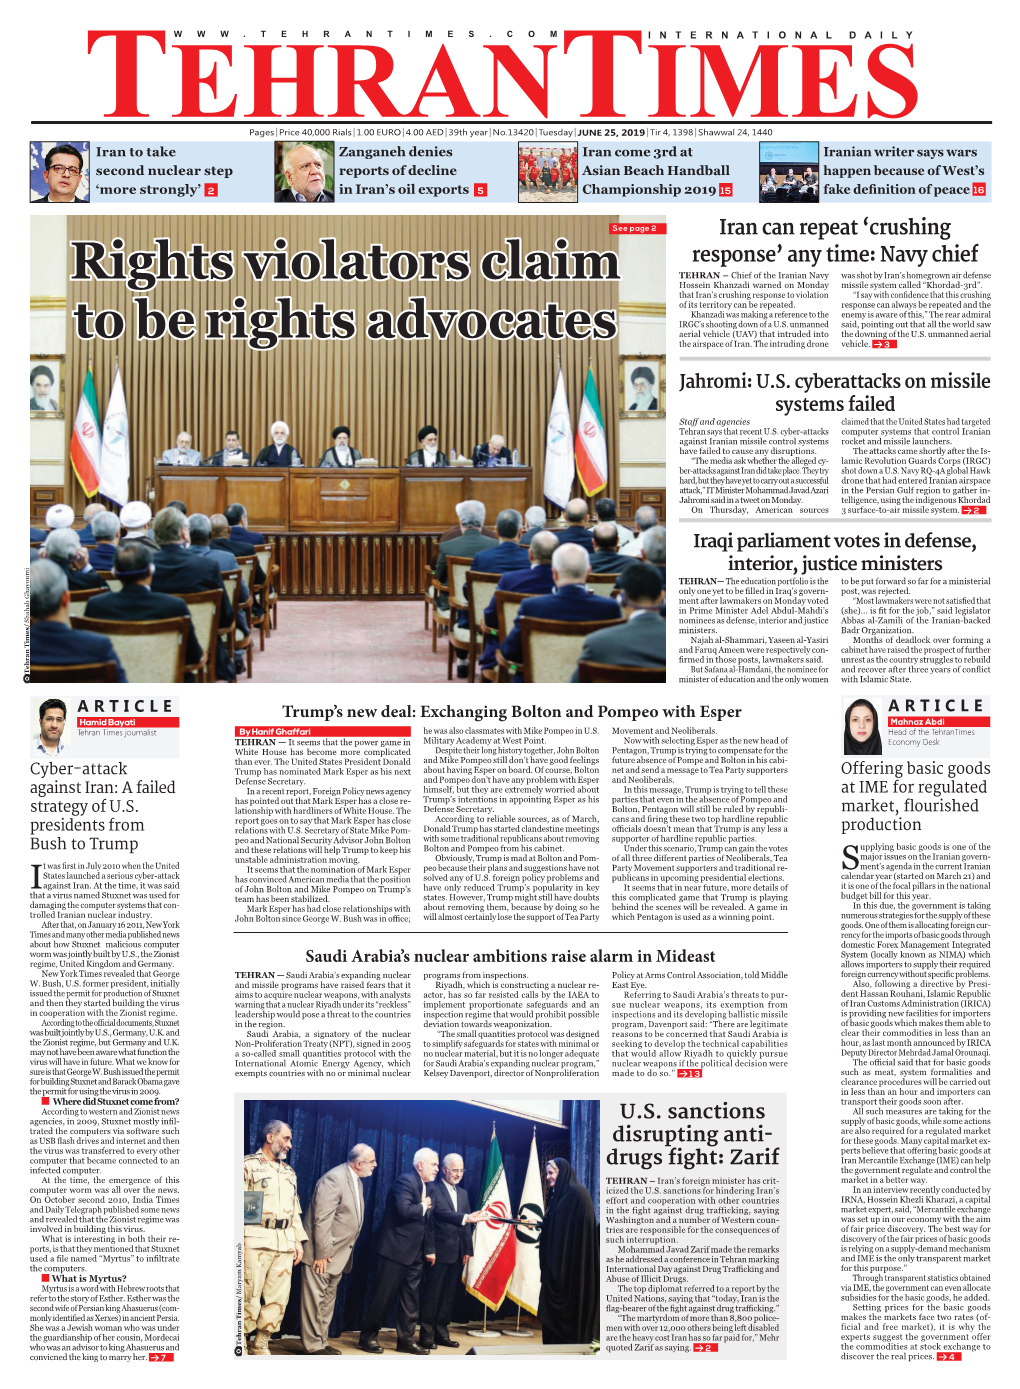 Rights Violators Claim to Be Rights Advocates Tehran Timesjournalist ARTICLE Hamid Bayati ‘More Strongly’ Second Nuclearstep Iran Totake